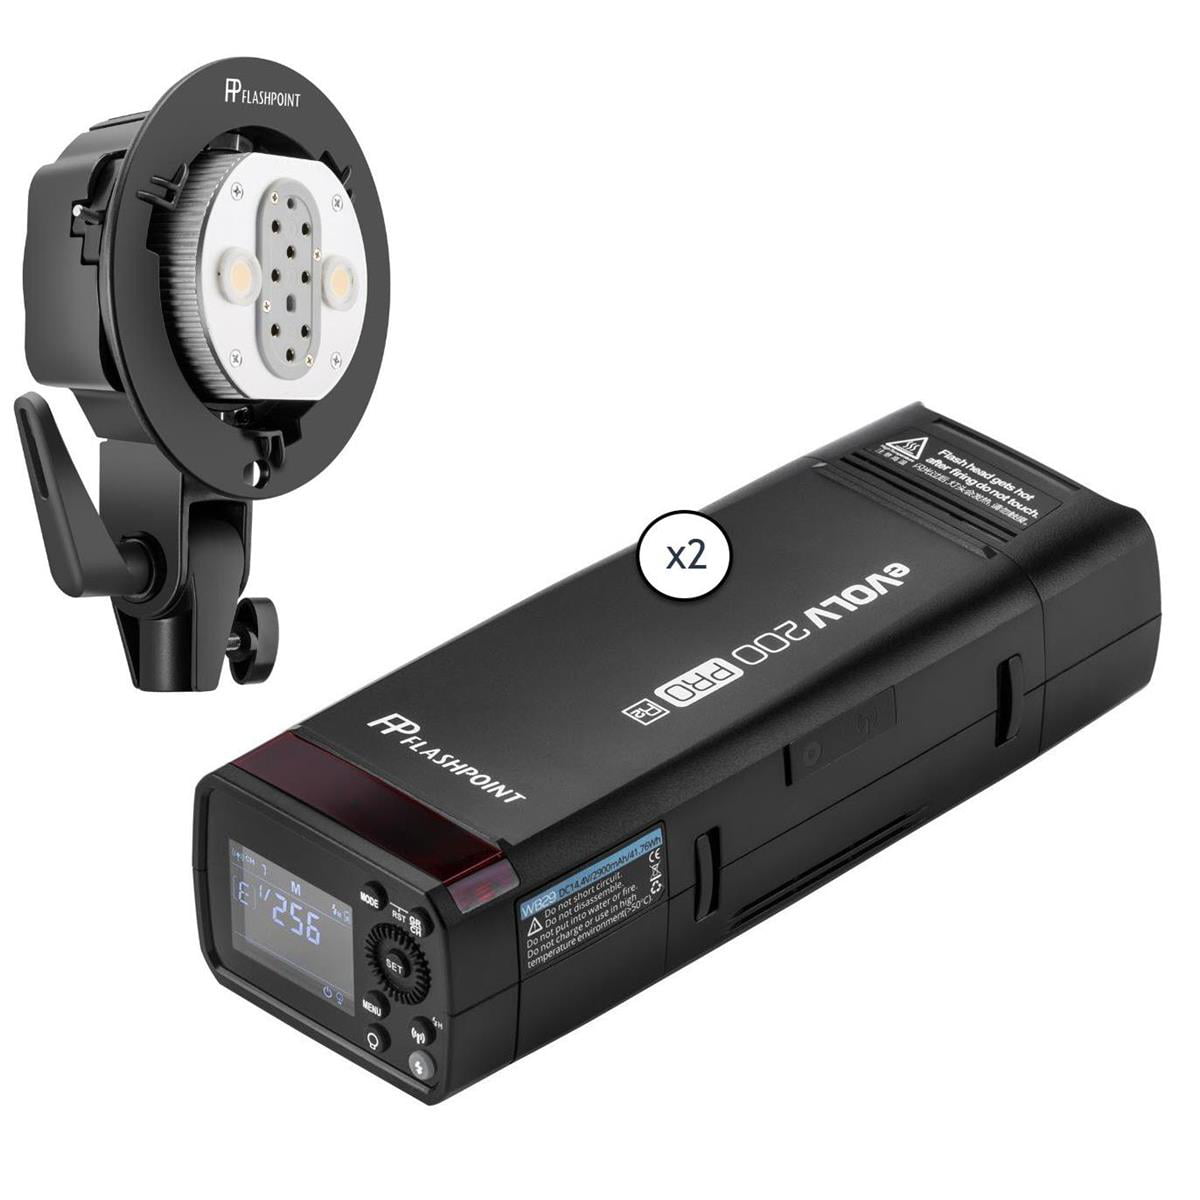 Flashpoint eVOLV 200 TTL Pocket Flash with Barndoor Value Kit with Ext Head and Round Flash Head and AK-R1 Accessory Kit